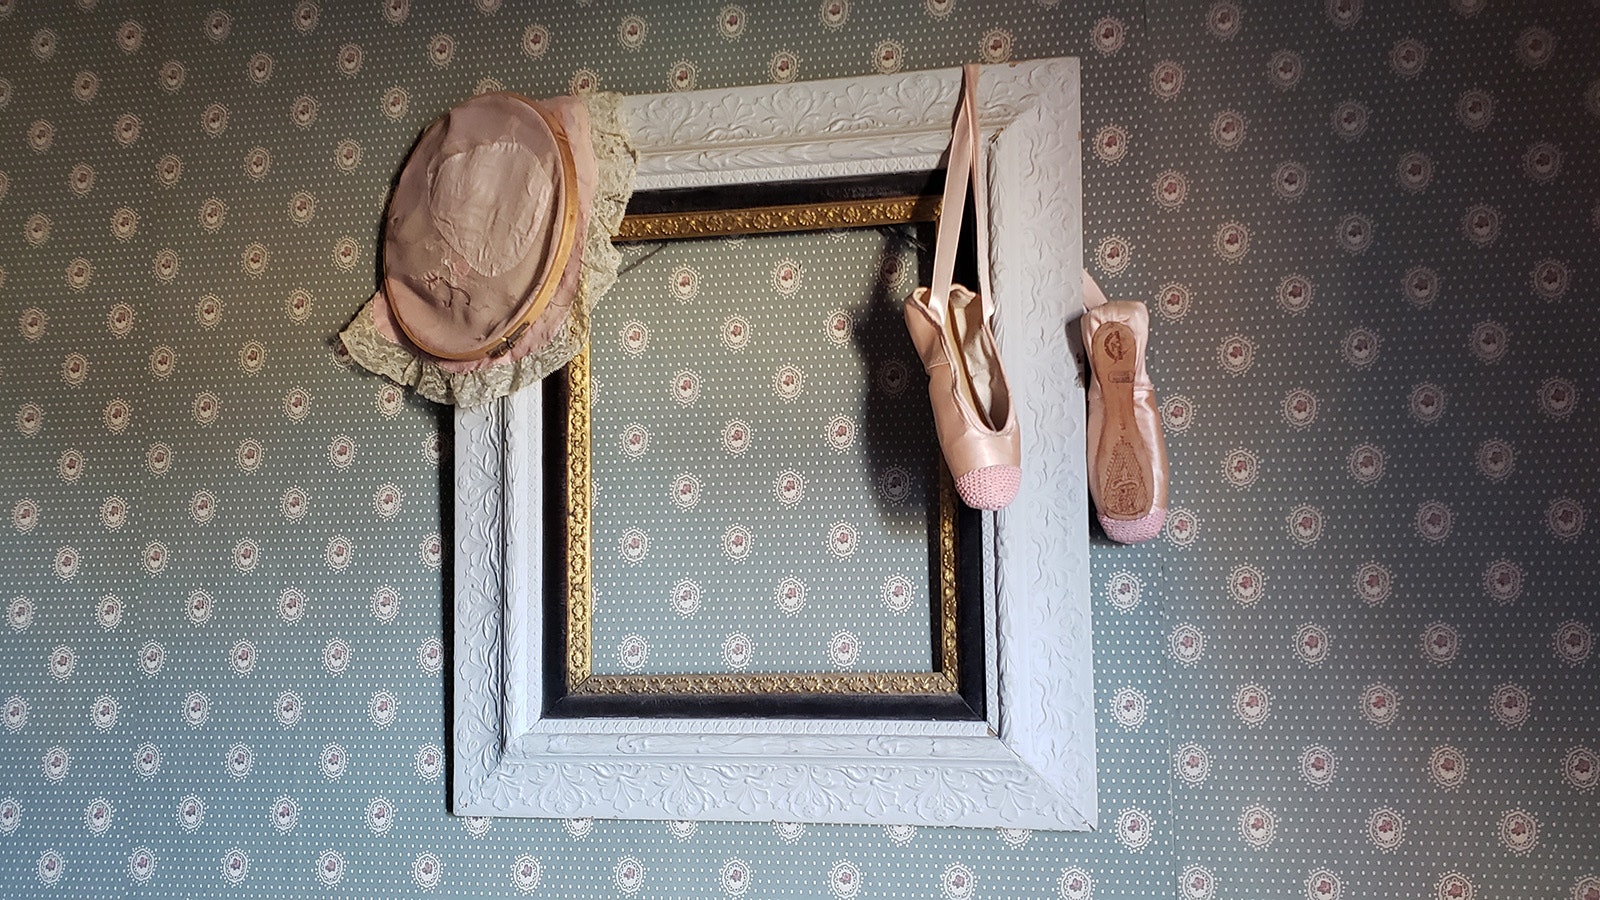 A ballerina motif in one of the guest rooms at The Virginian.